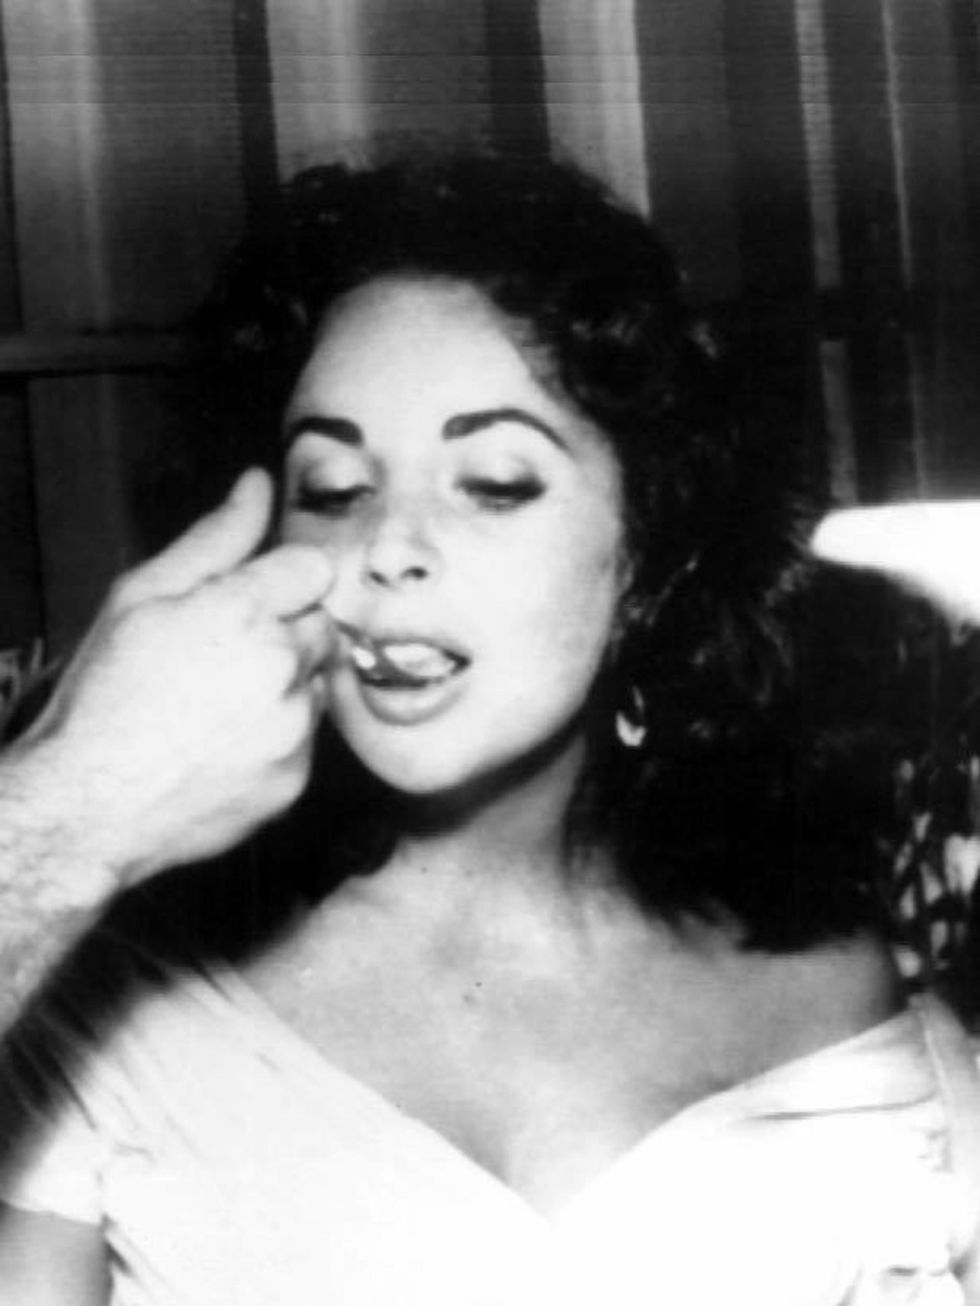 <p><a href="http://www.elleuk.com/starstyle/special-features/%28section%29/elizabeth-taylor-a-retrospective">Elizabeth Taylor</a> is fed wedding cake by her new husband Mike Todd after their wedding in Mexico, 1957</p>